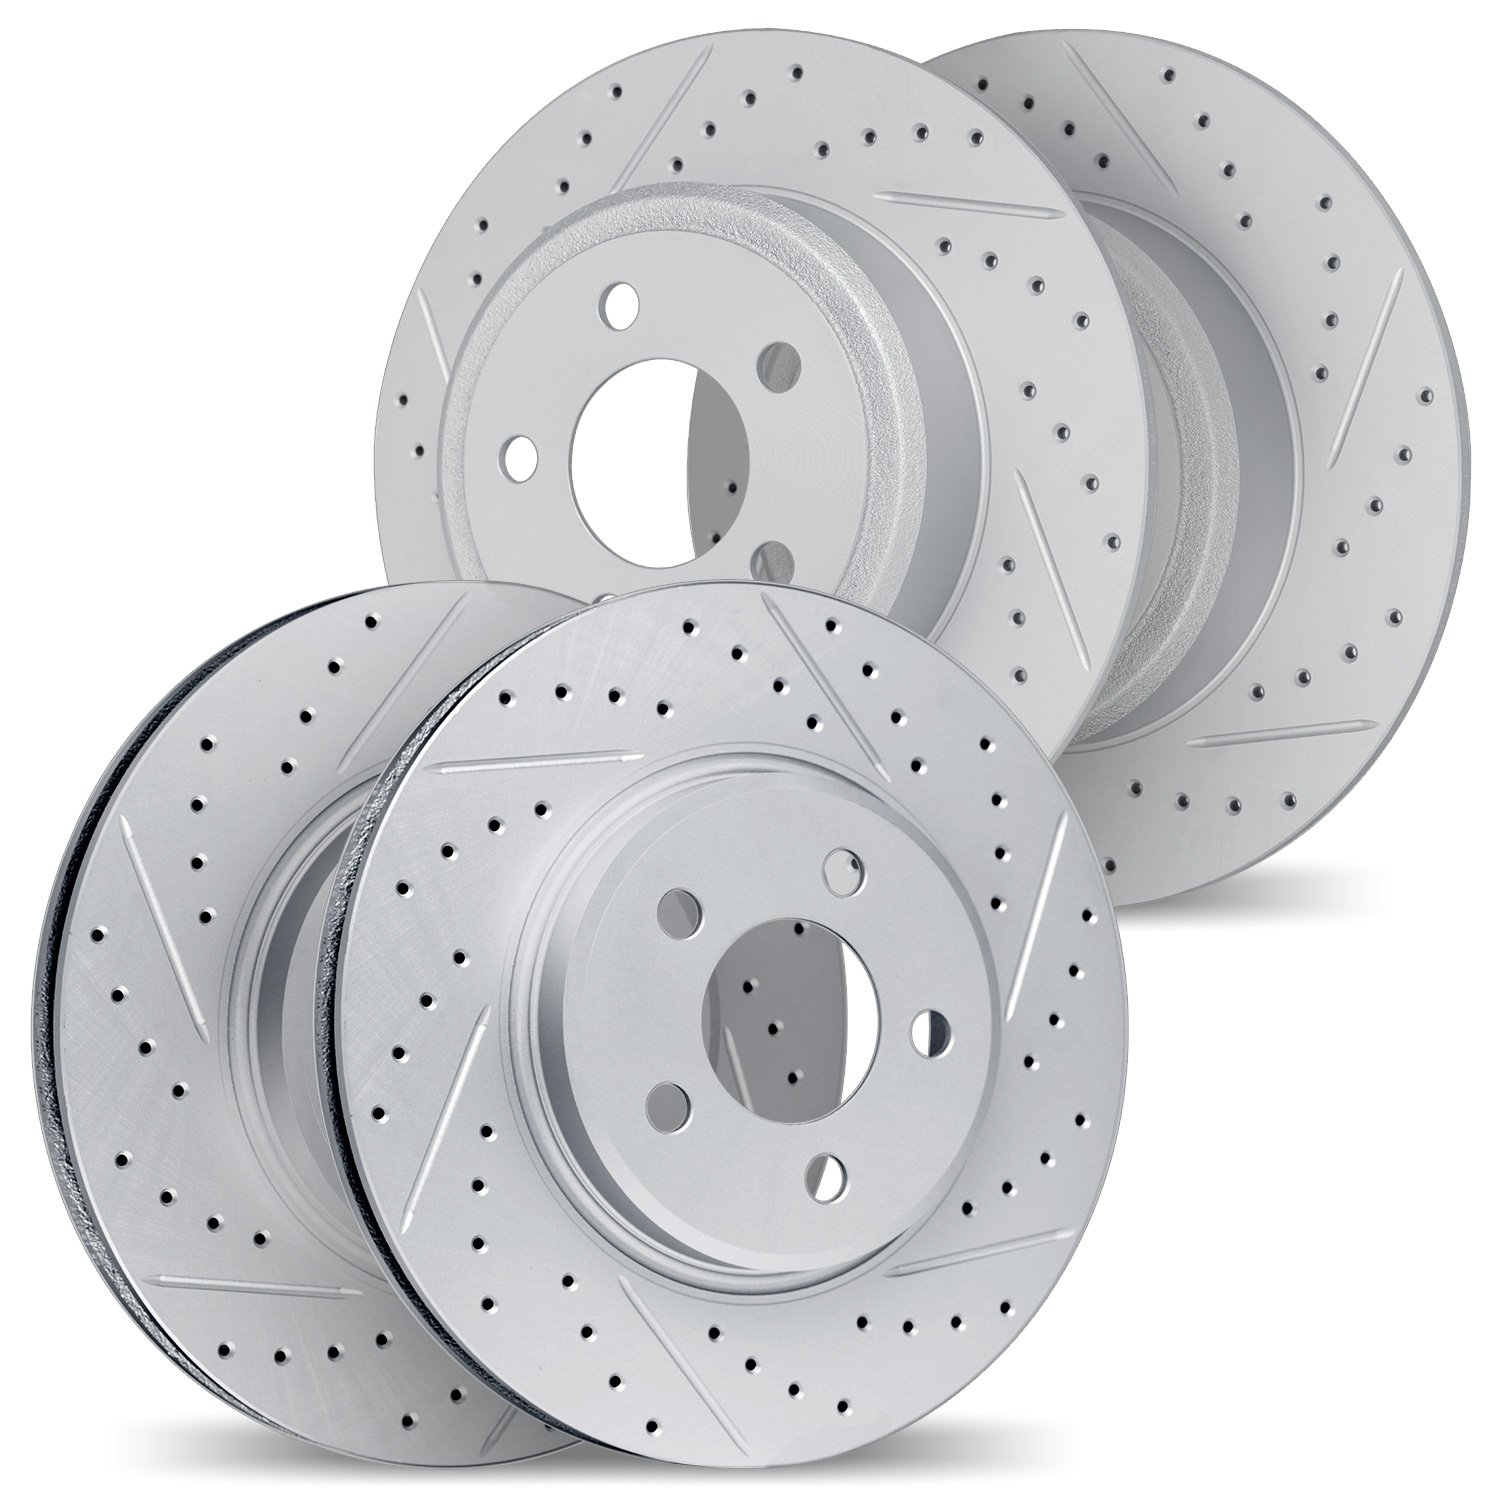 2004-46031 Geoperformance Drilled/Slotted Brake Rotors, 2012-2016 GM, Position: Front and Rear